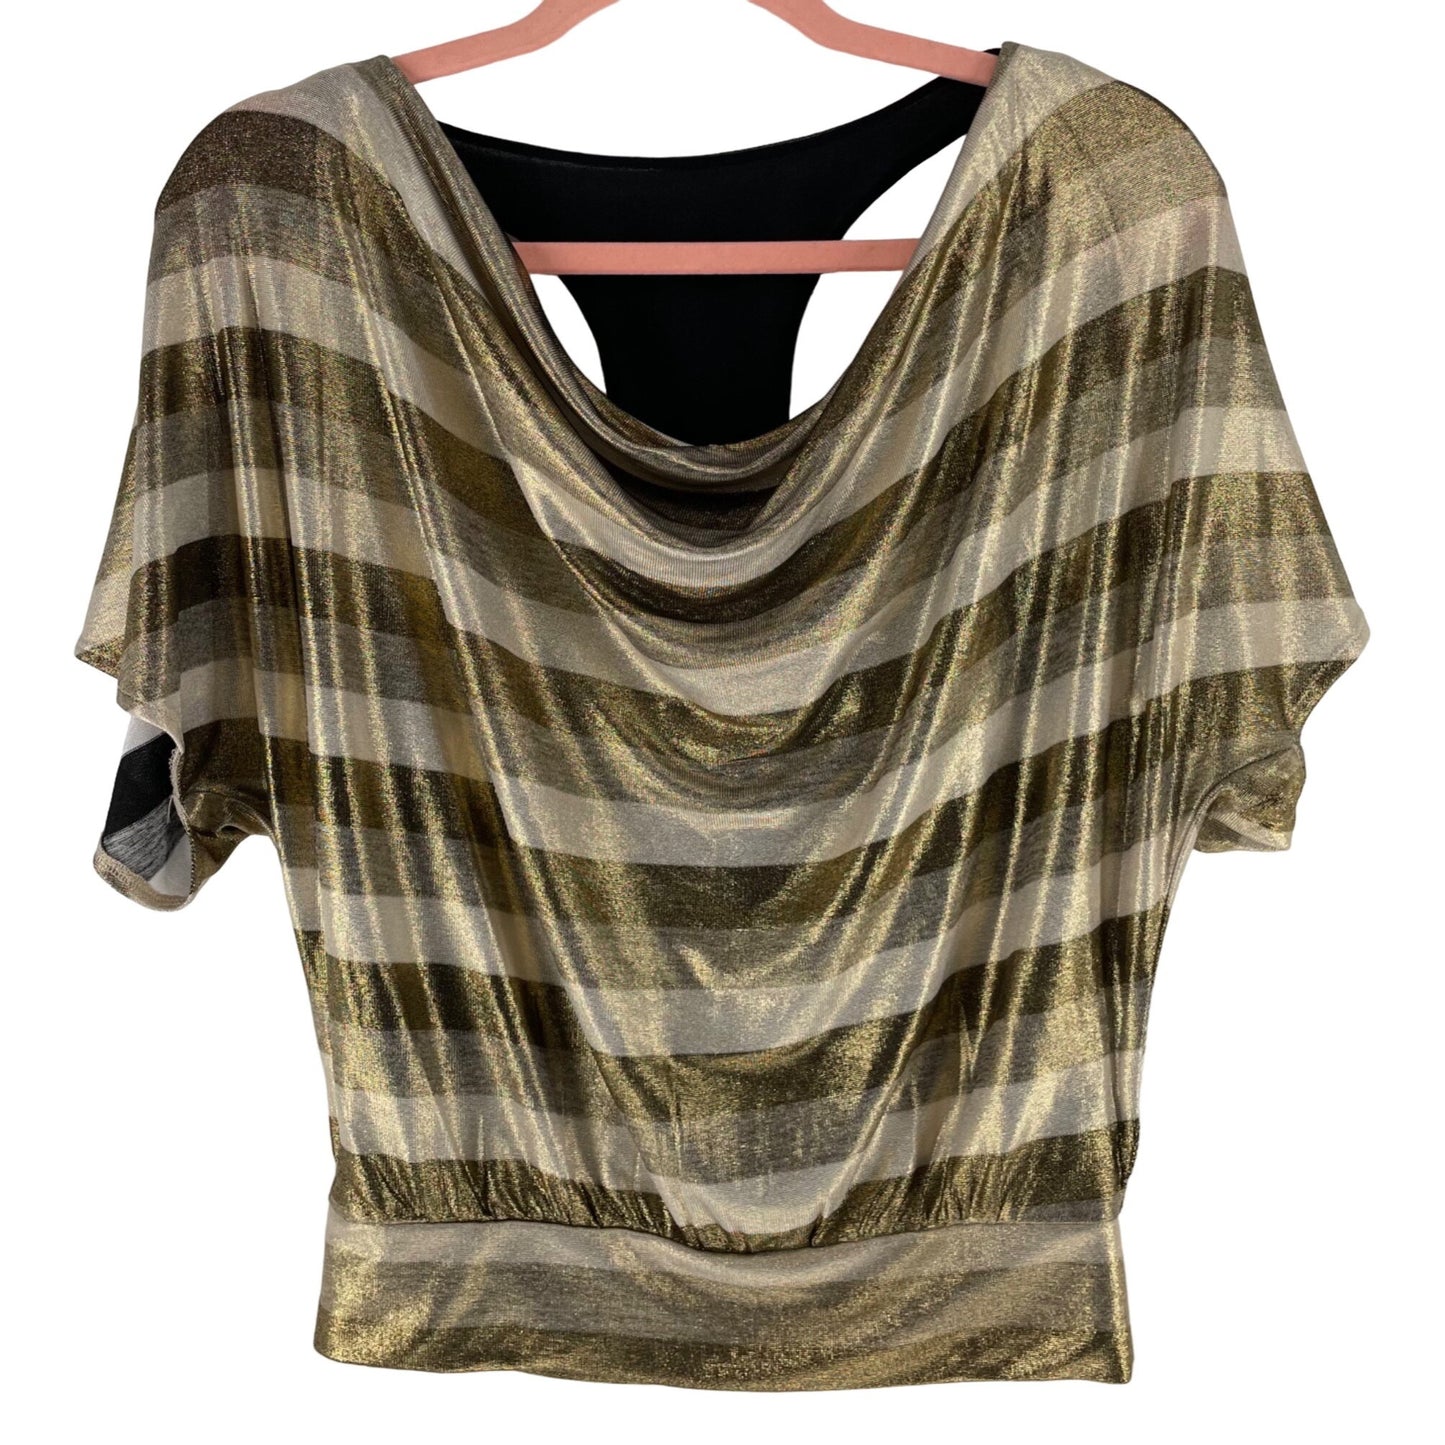 Express Women's Size XS Cowl Neck Short-Sleeved Gold-Striped Blouse